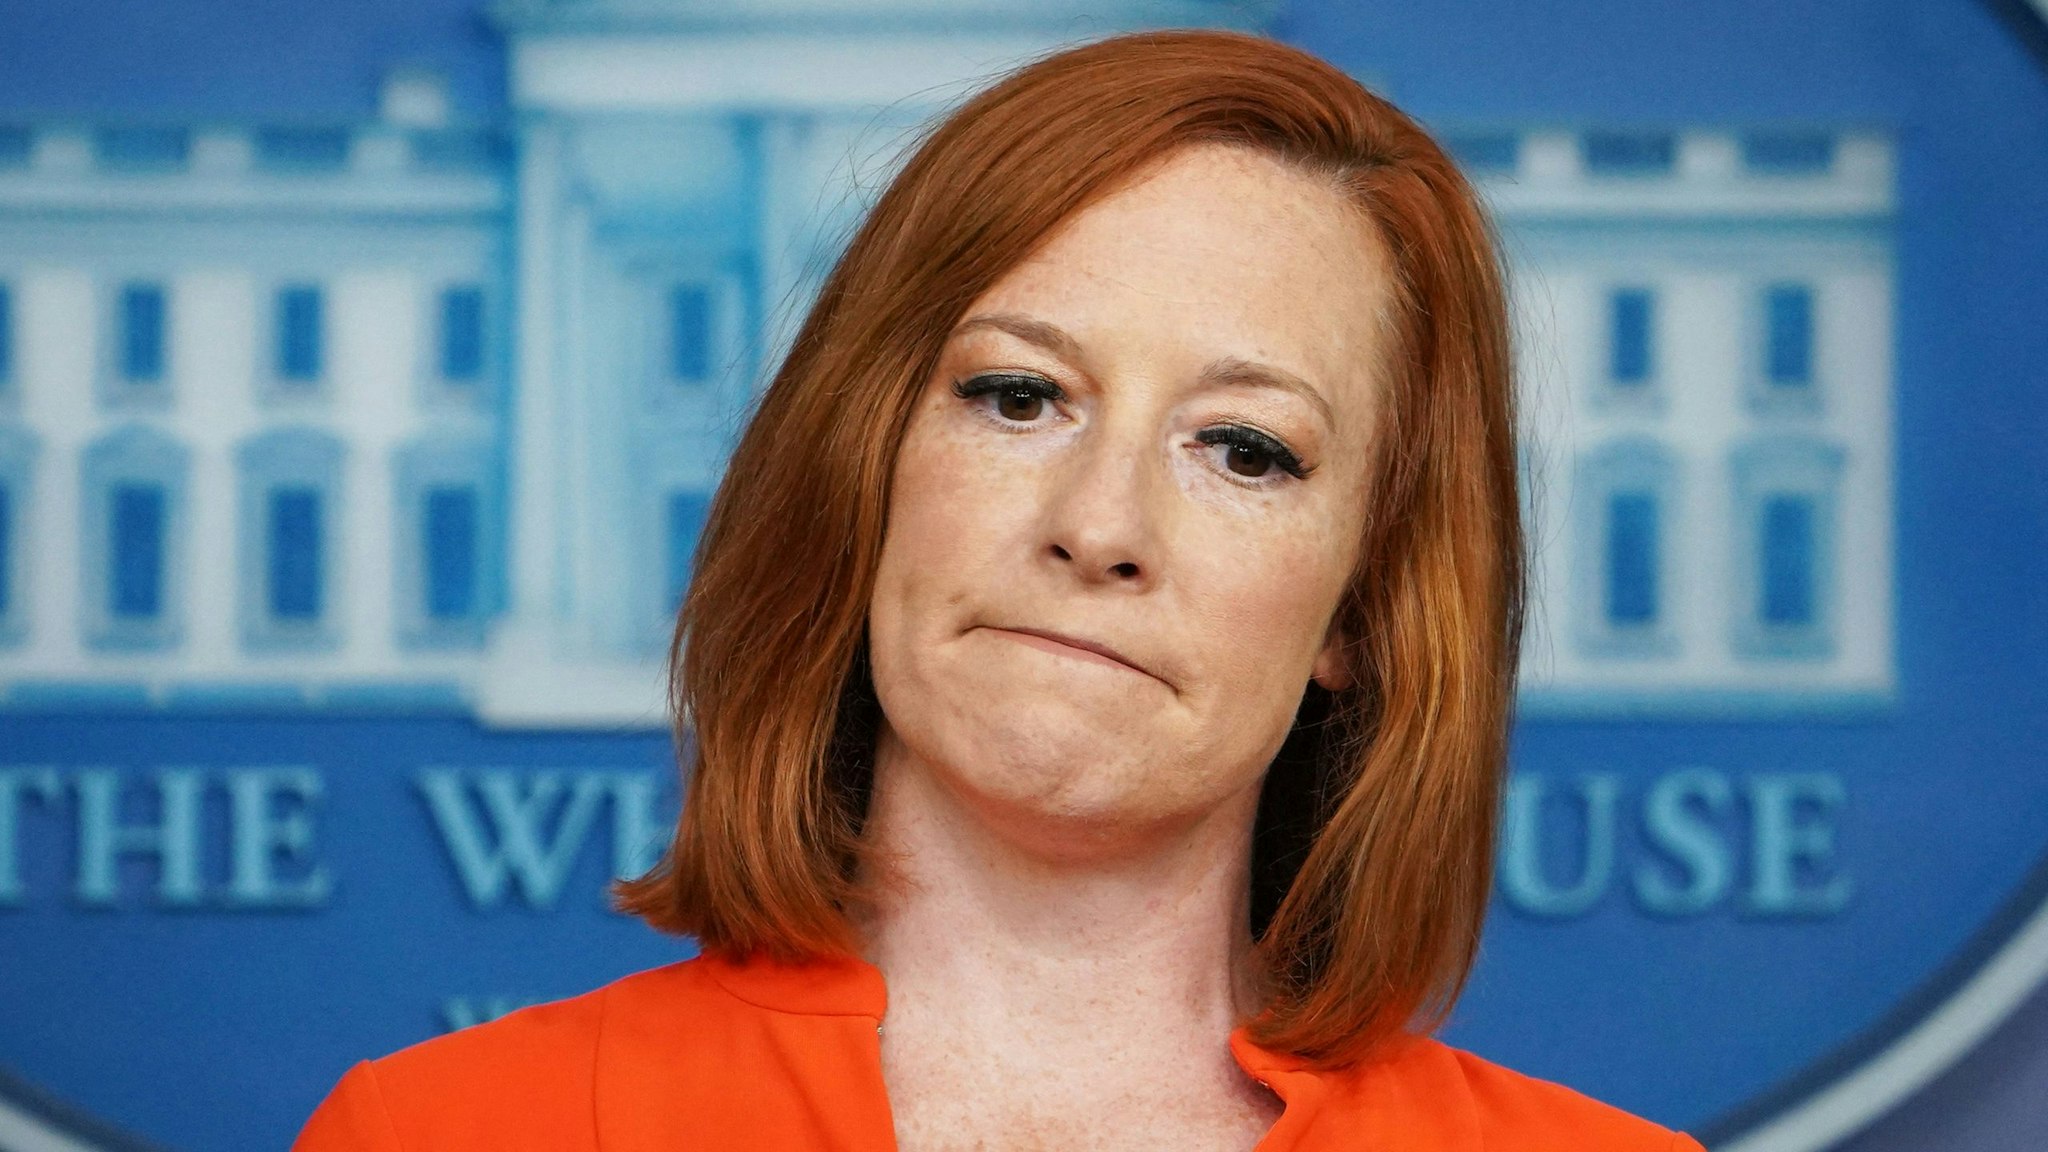 White House Press Secretary Jen Psaki speaks during the daily briefing in the Brady Briefing Room of the White House in Washington, DC on June 21, 2021.